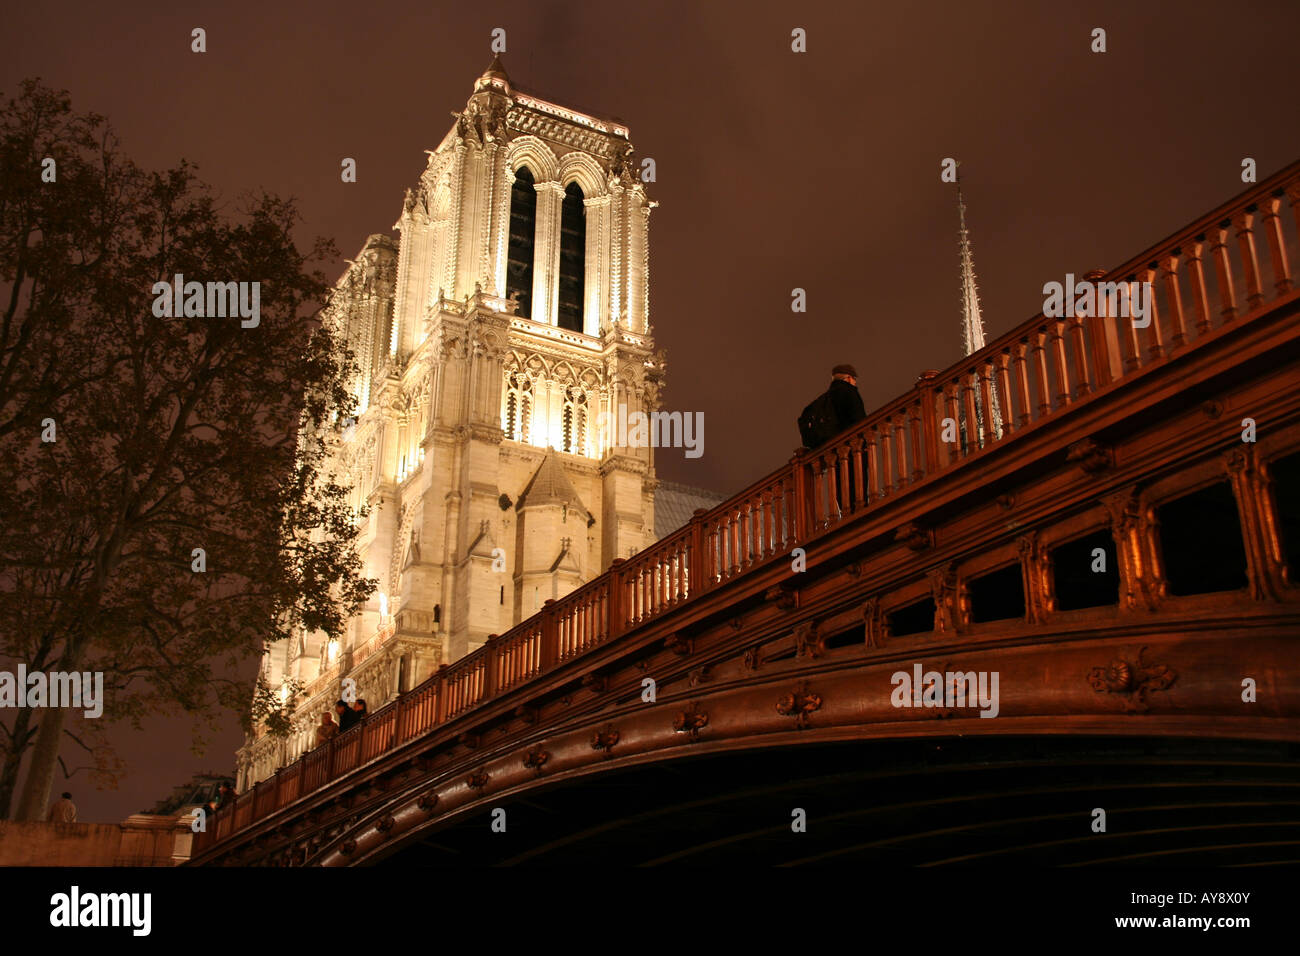 Paris by night - Notre-Dame cathedral and Pont au Double Stock Photo